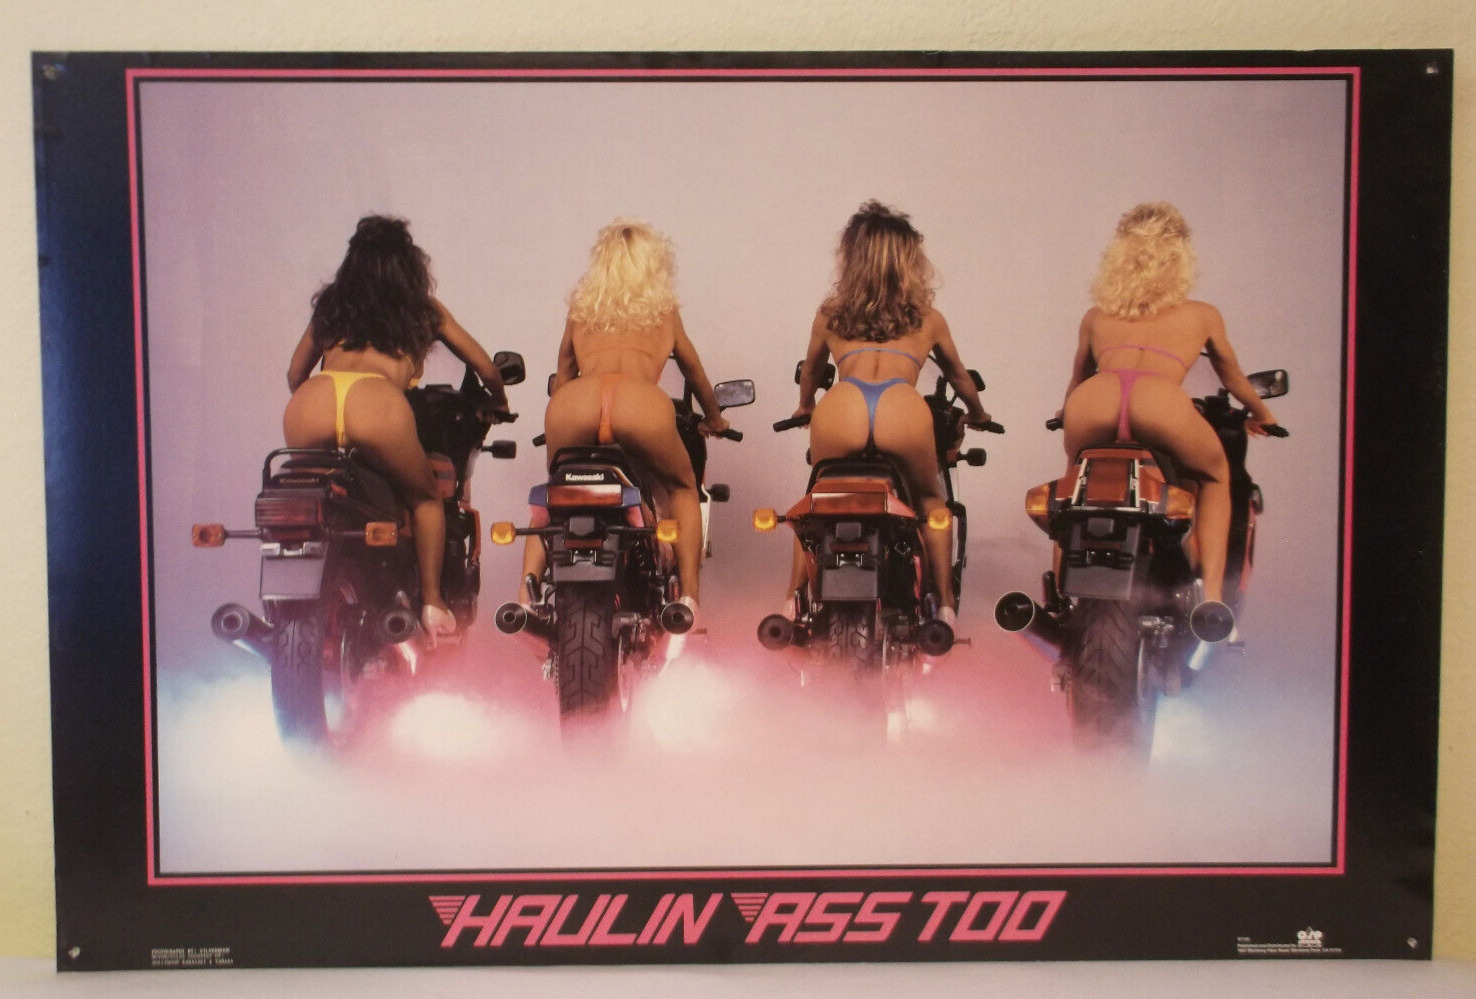 11 Original Vintage Poster Haulin ass motorcycle girls sexy pinup poster Chevy